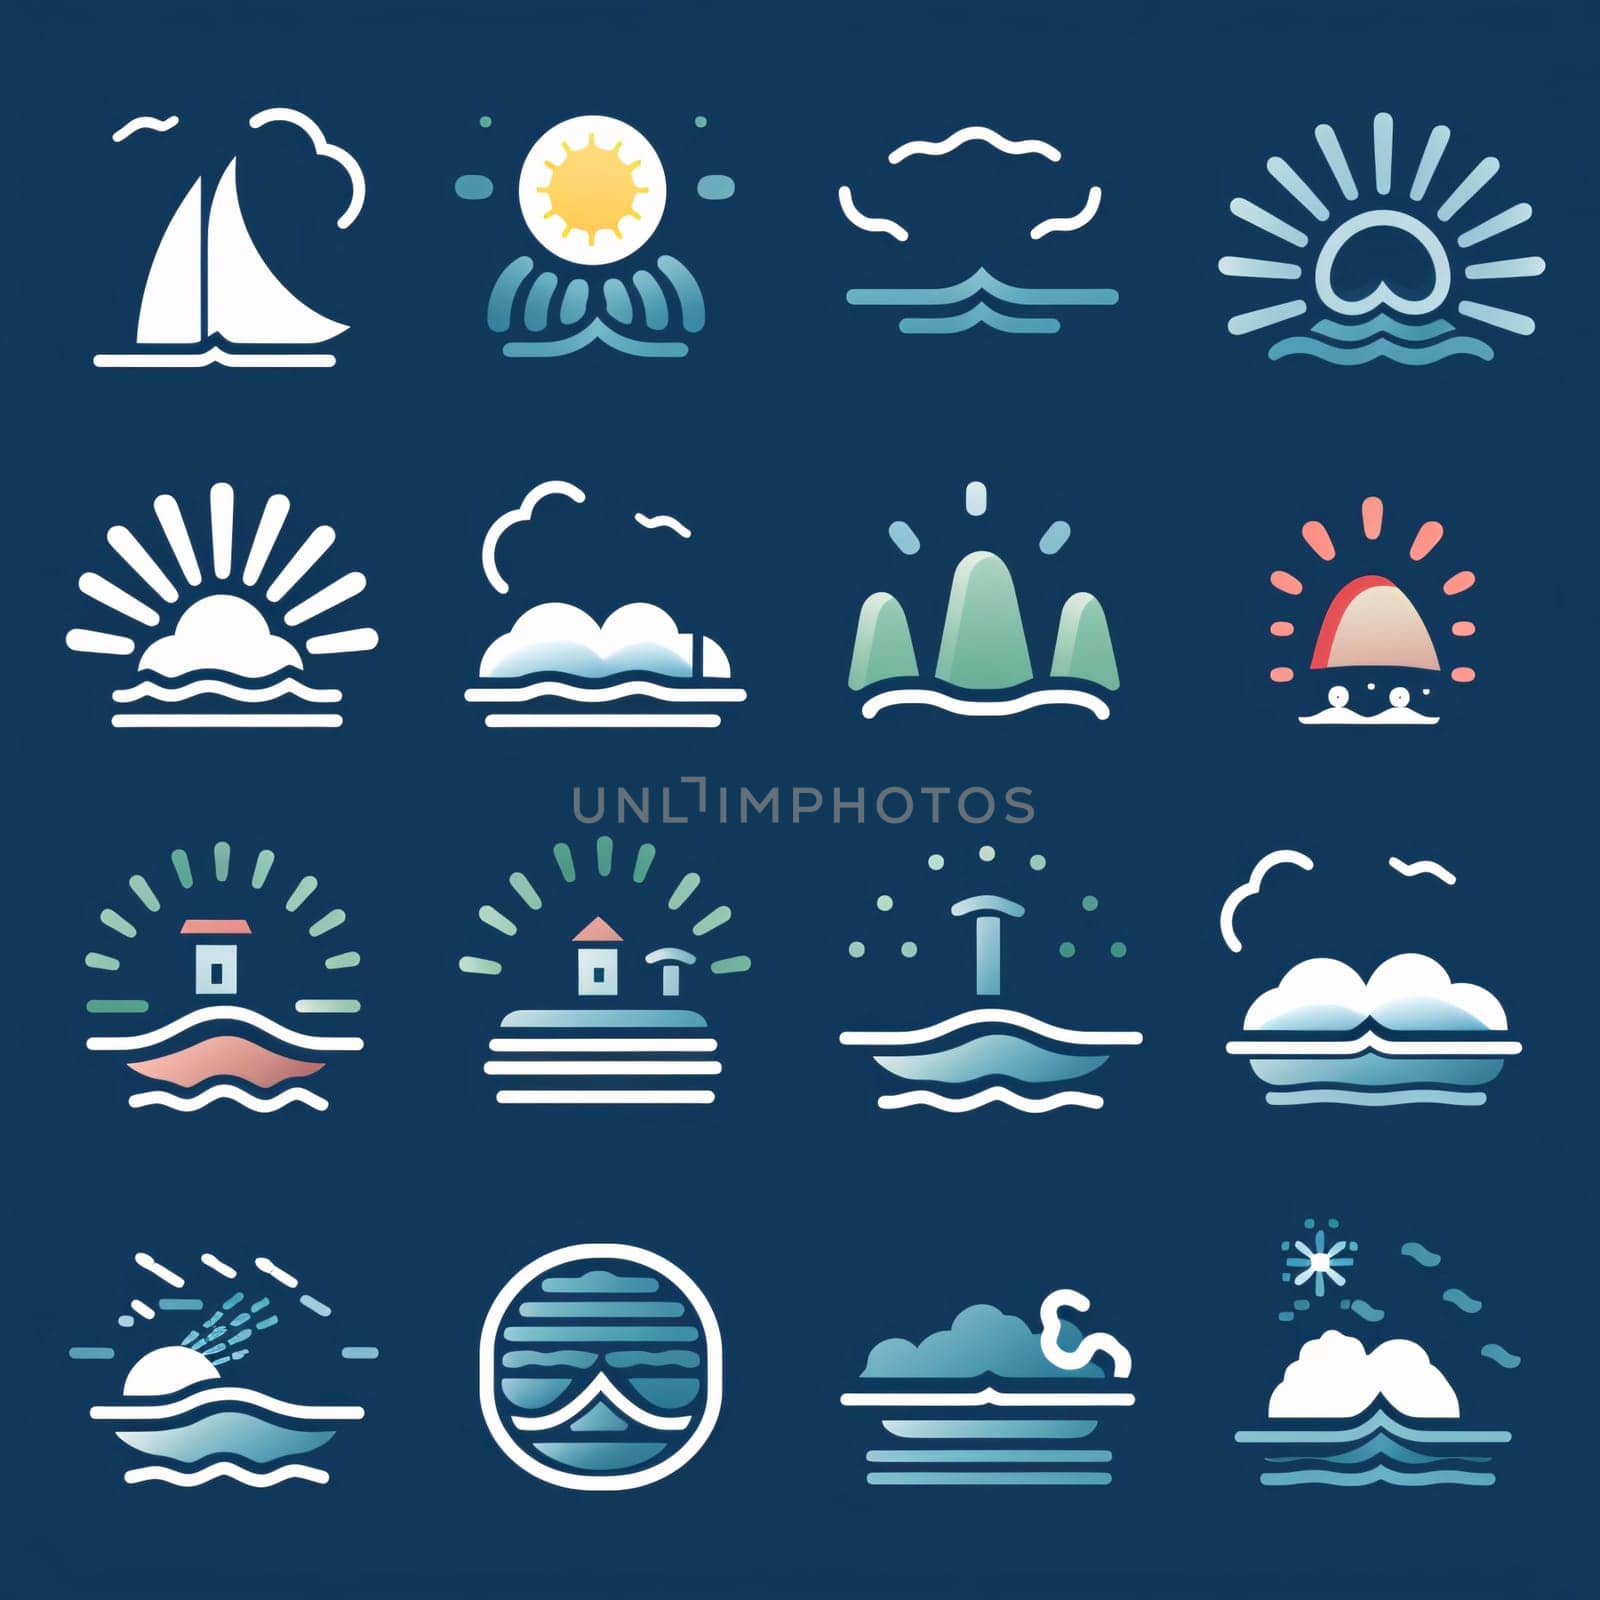 New icons collection: Set of sea and ocean icons. Vector illustration in flat style.